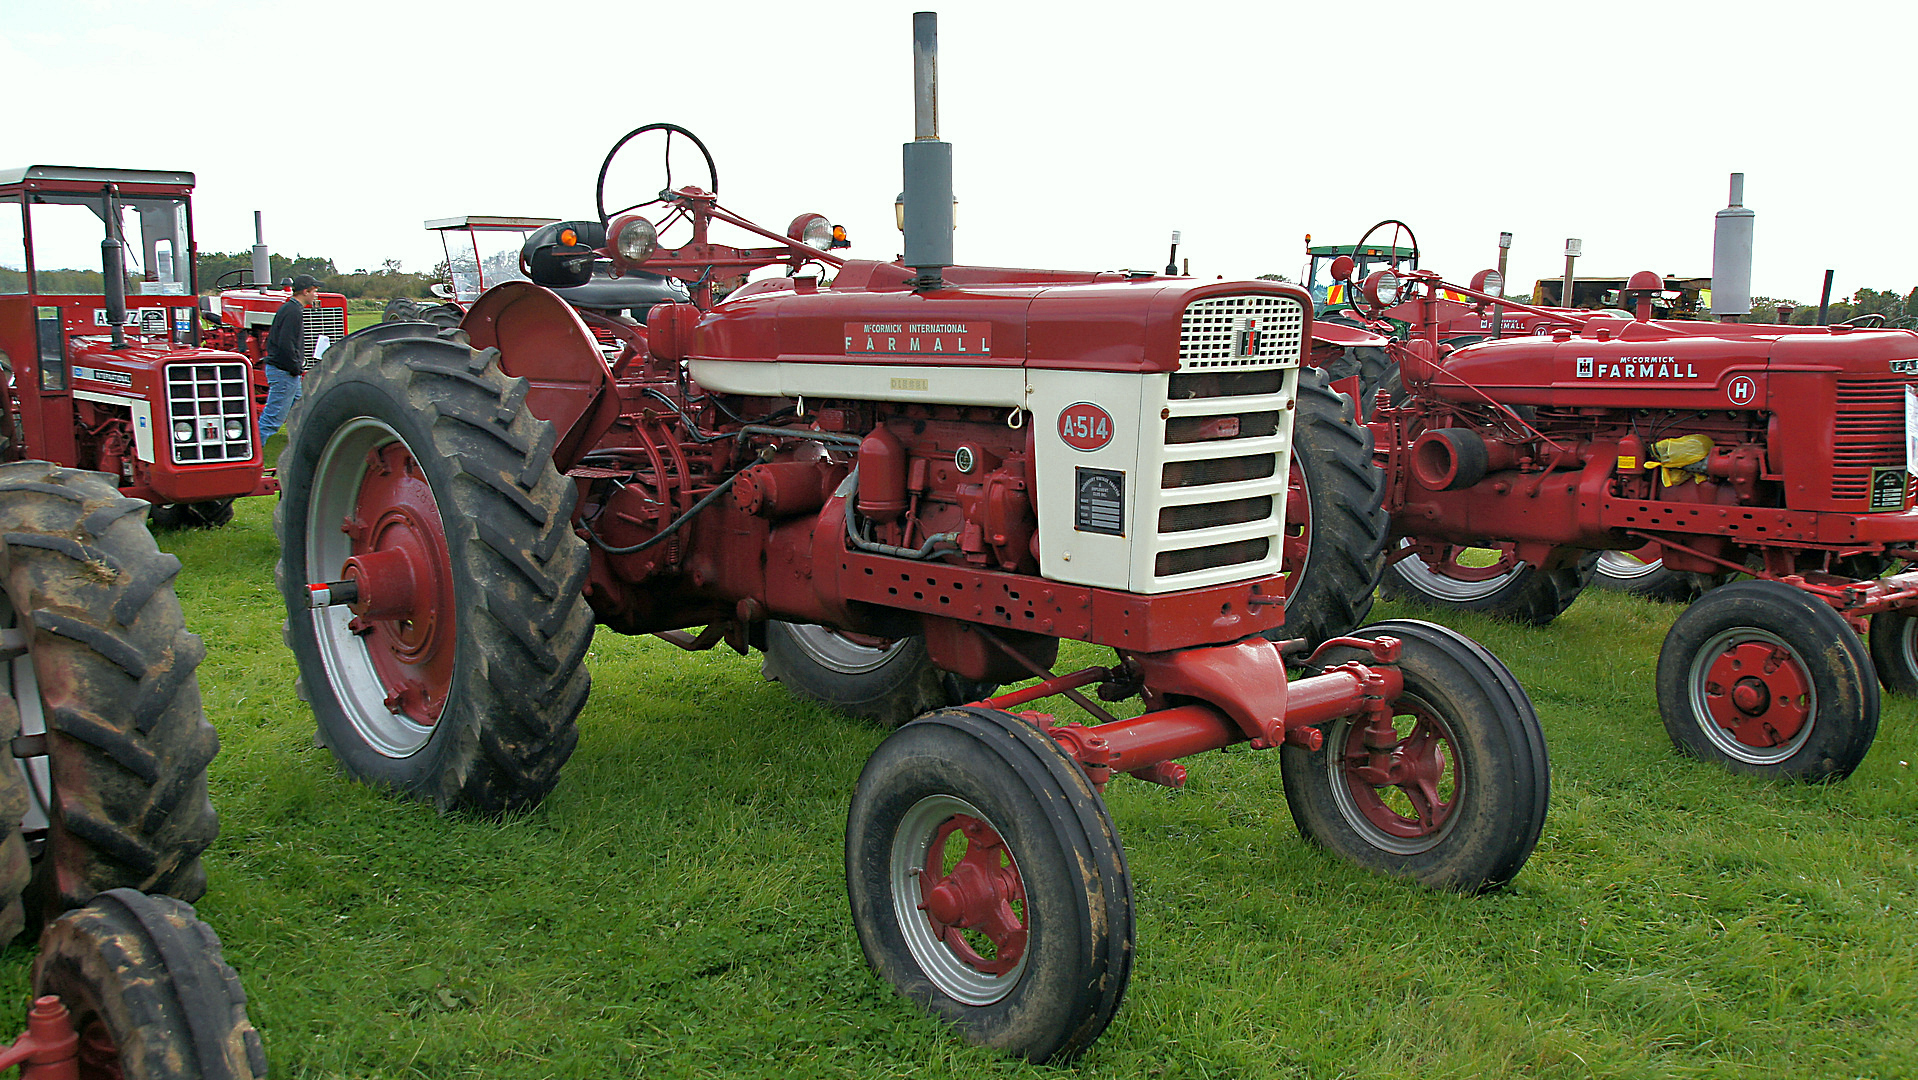 Farmall A-514 Tractor. | Flickr - Photo Sharing!